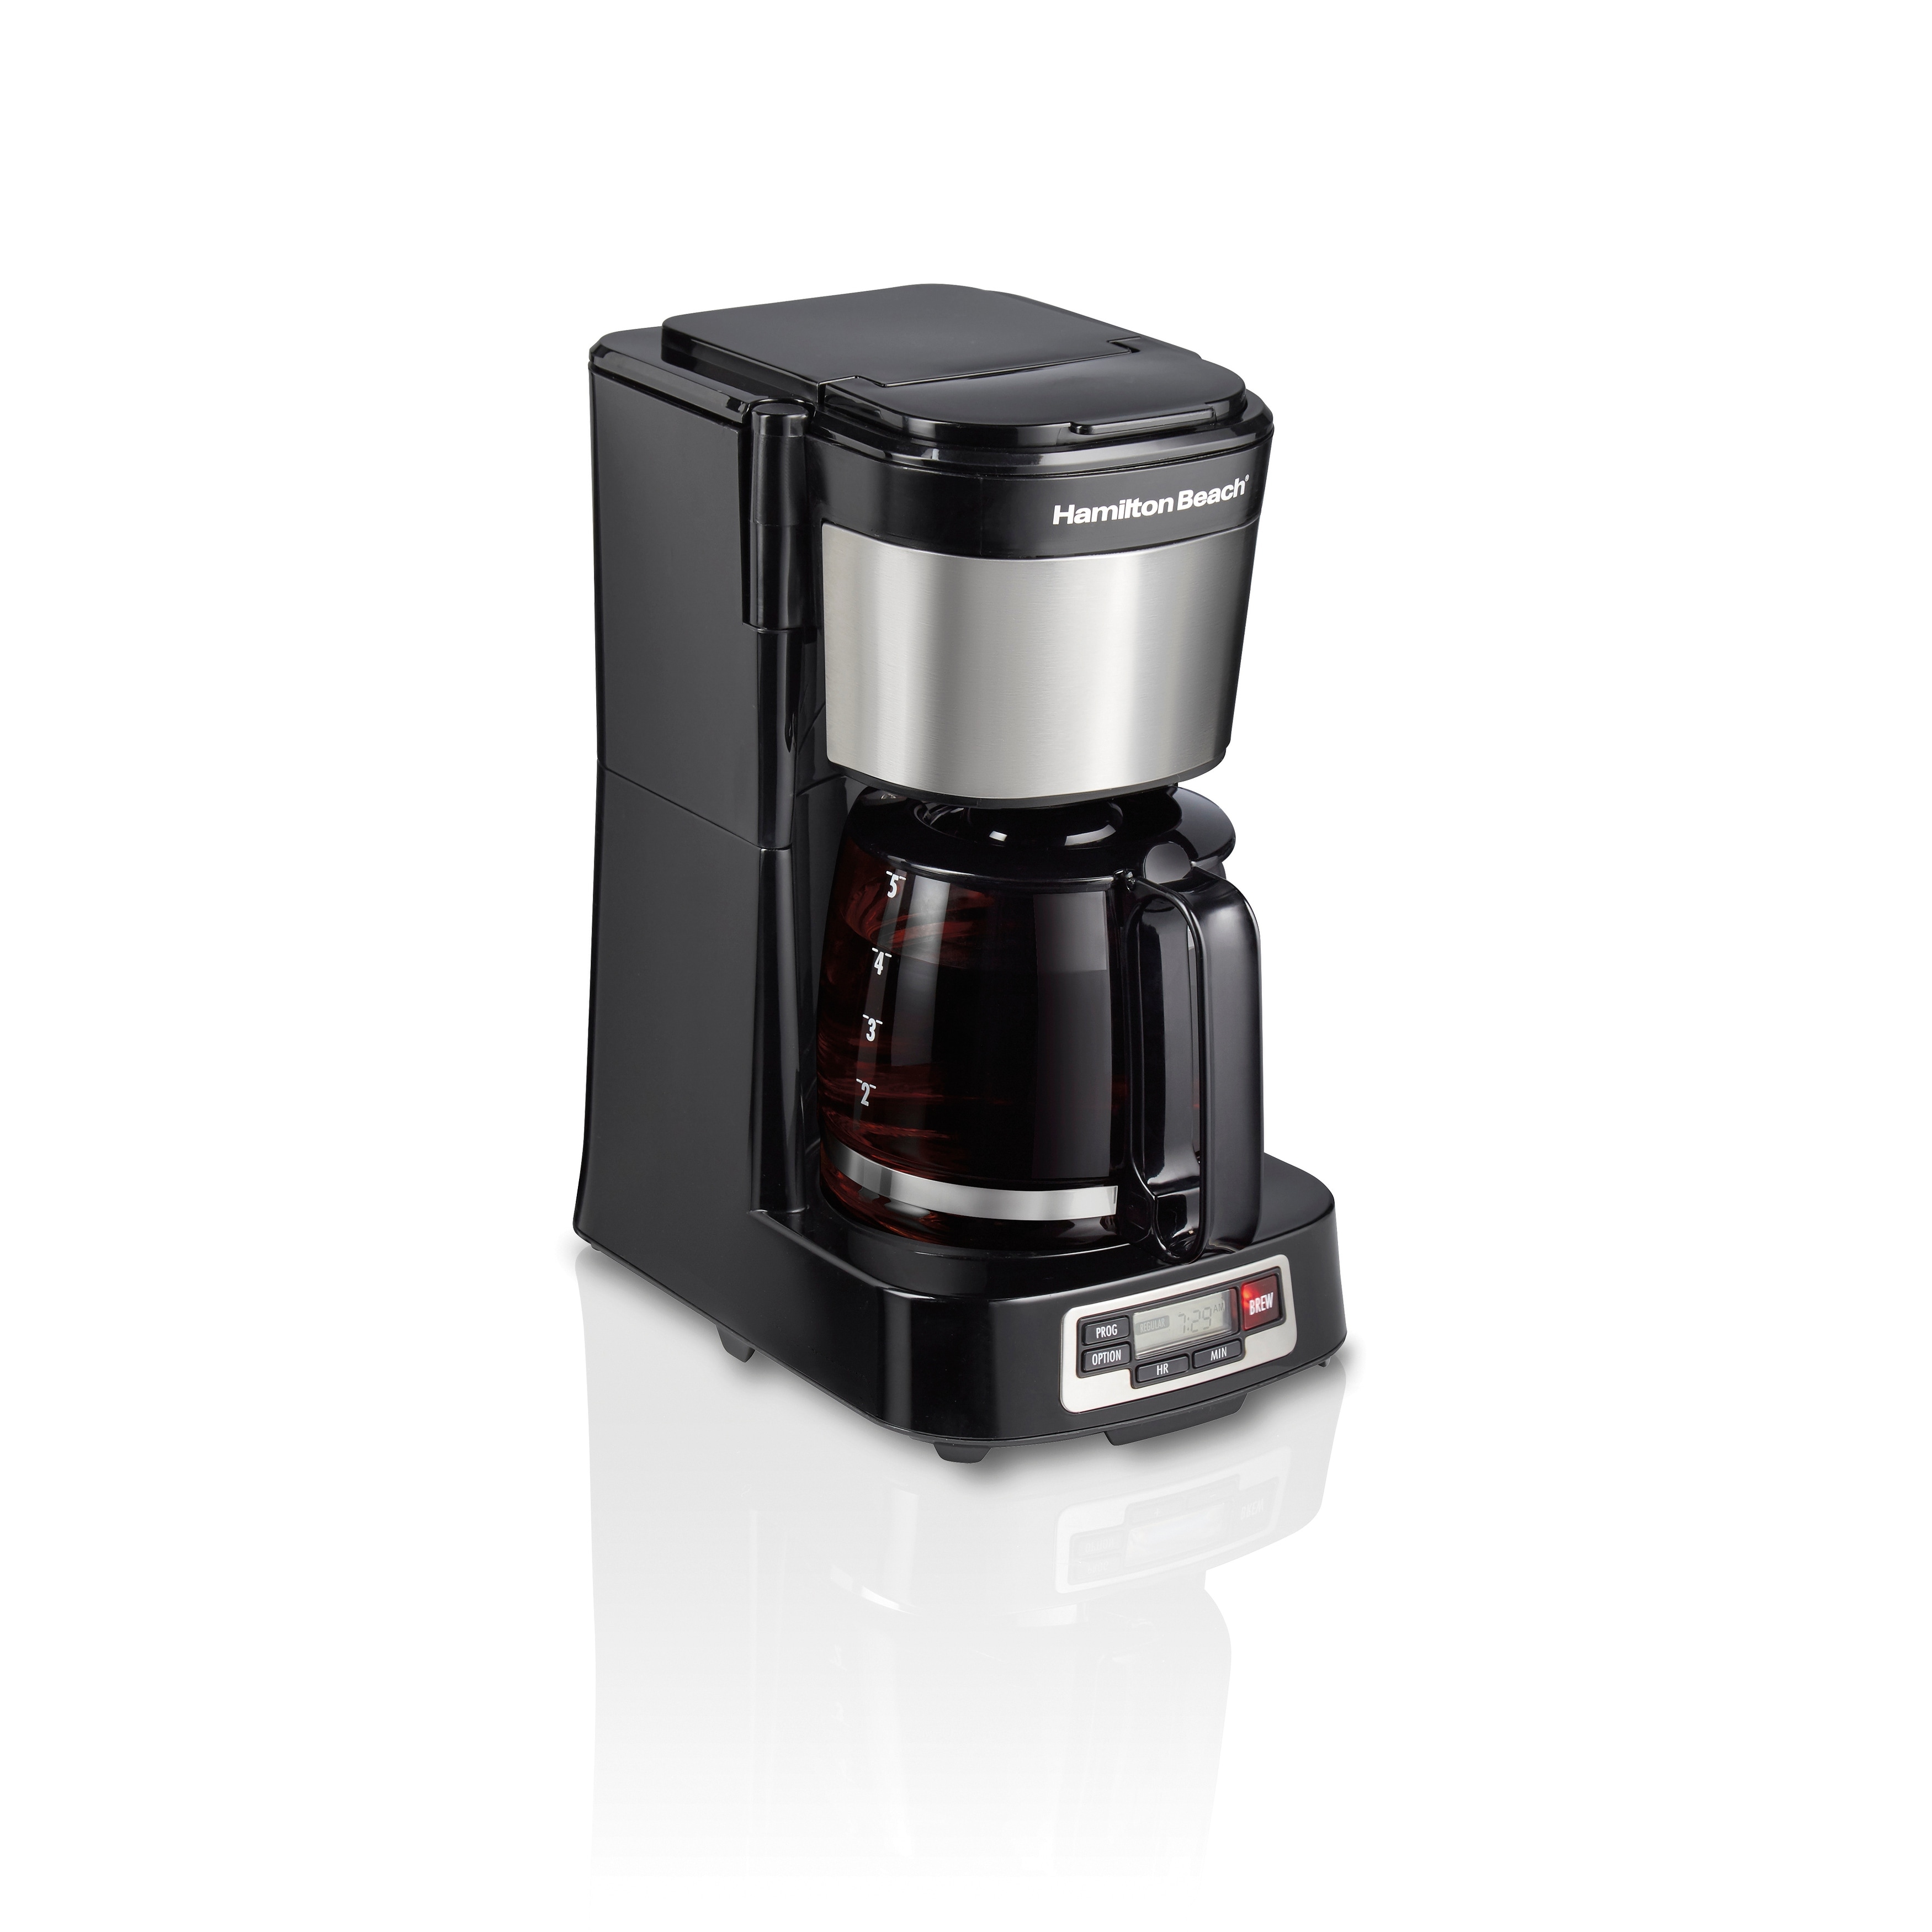 Hamilton Beach 5 Cup Compact Coffee Maker with Programmable Clock